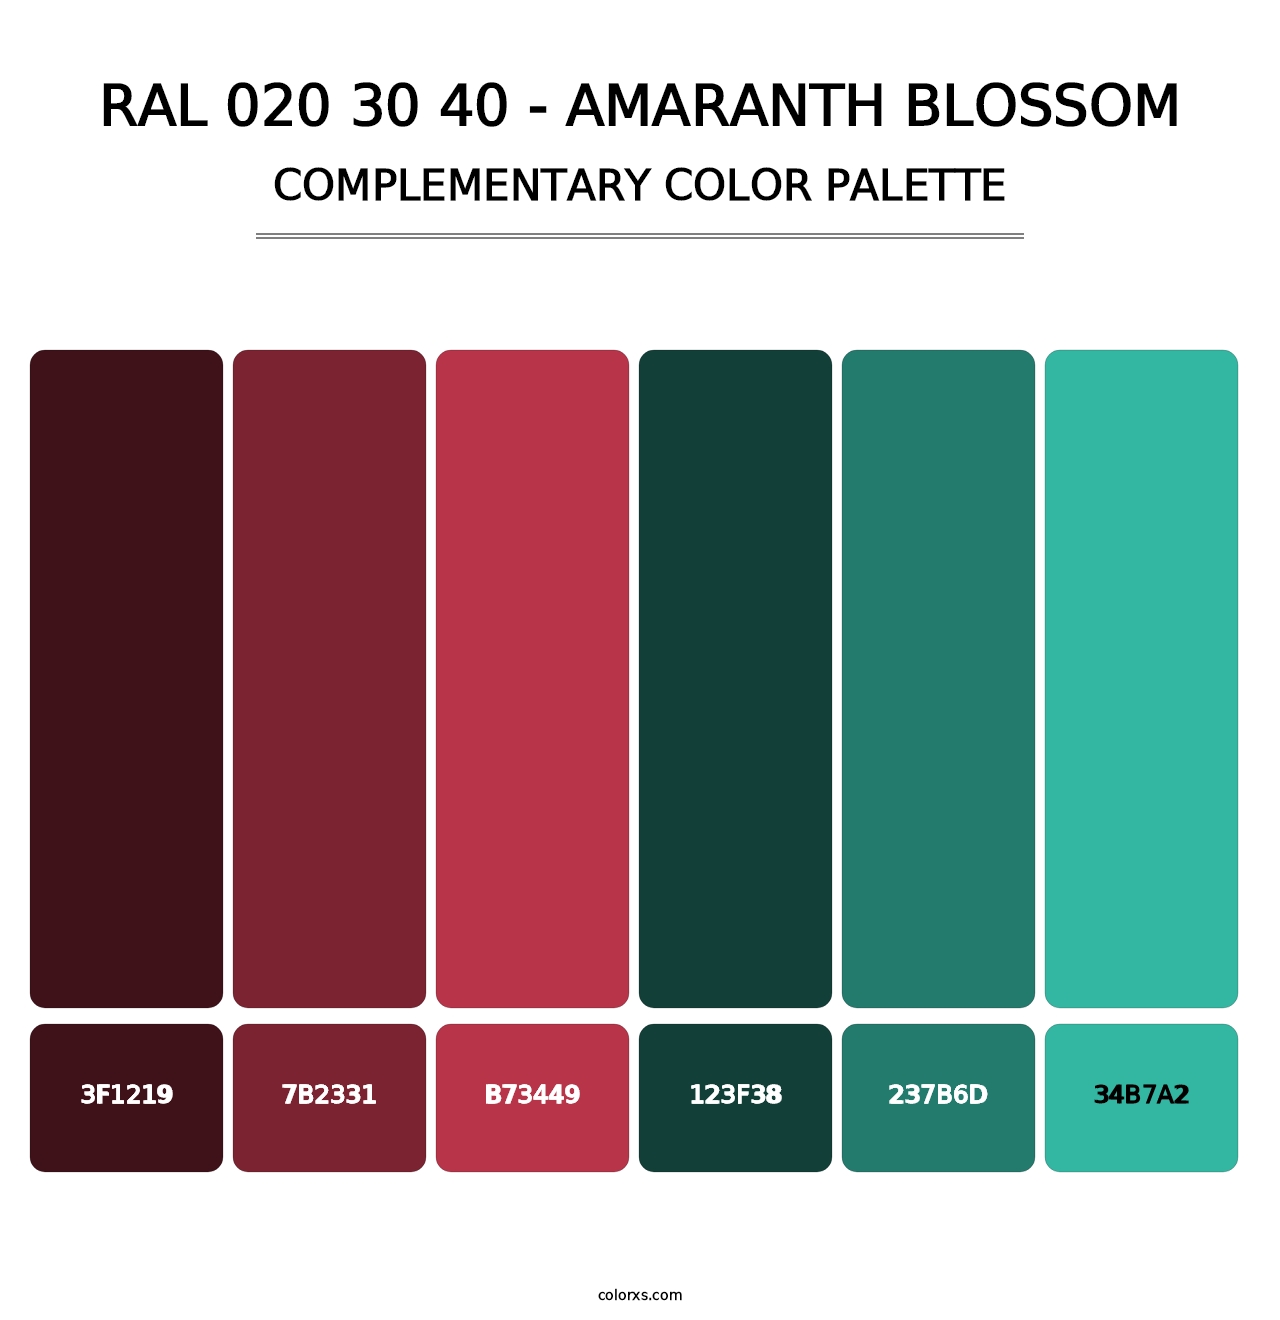 RAL 020 30 40 - Amaranth Blossom - Complementary Color Palette